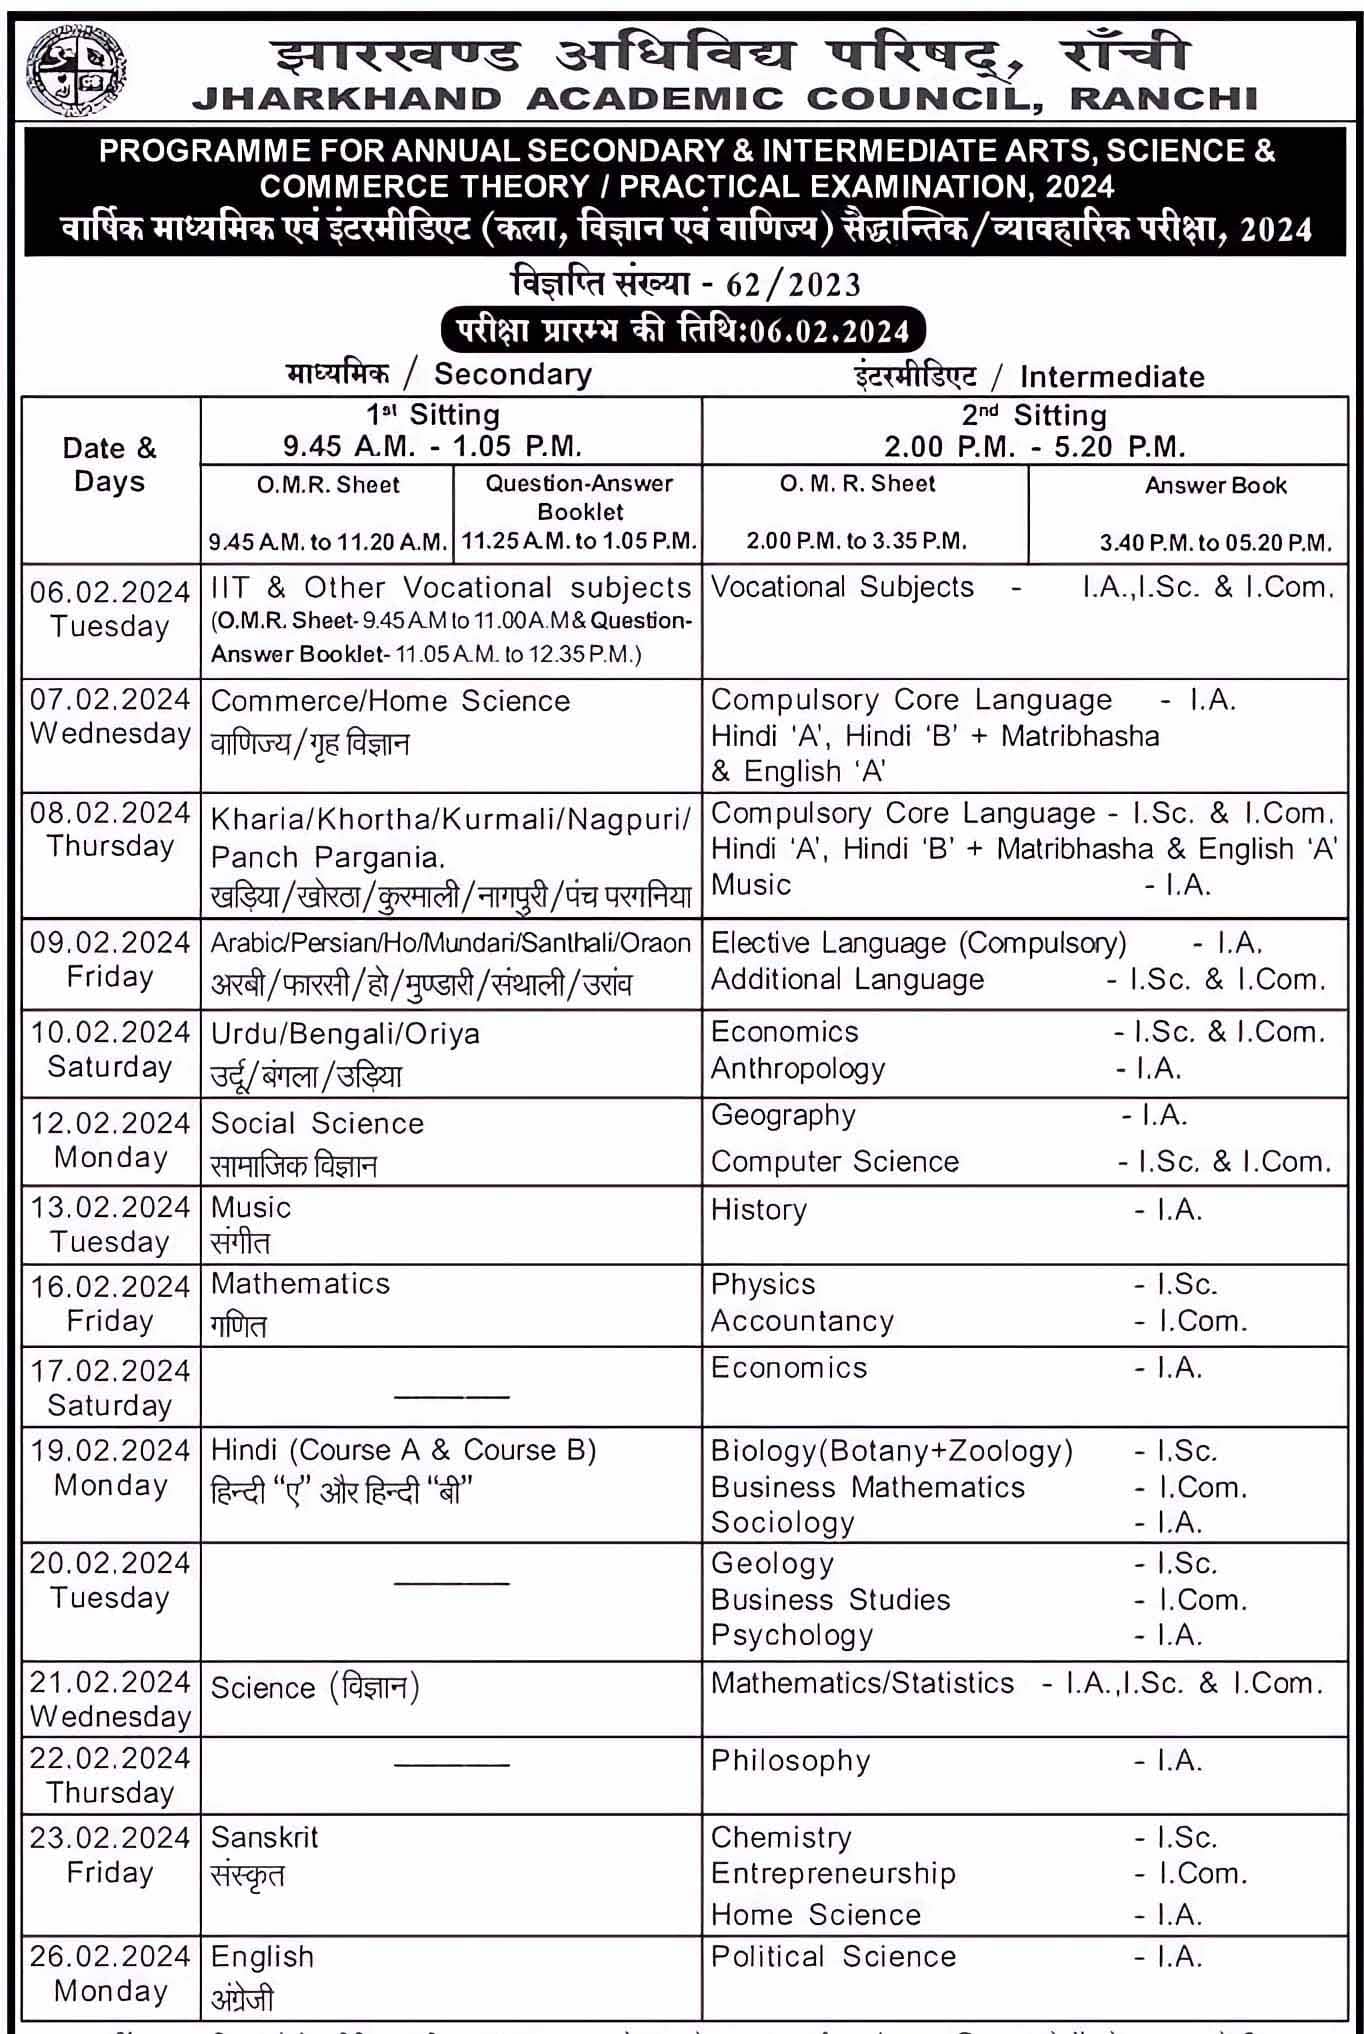 Jharkhand Academic Council (JAC) has released its academic calendar for 2023. Accordingly, the matriculation examinations to be held in 2024 will start on 06 February 2024. The matriculation examination will run till the Last Week Of February 2024. 